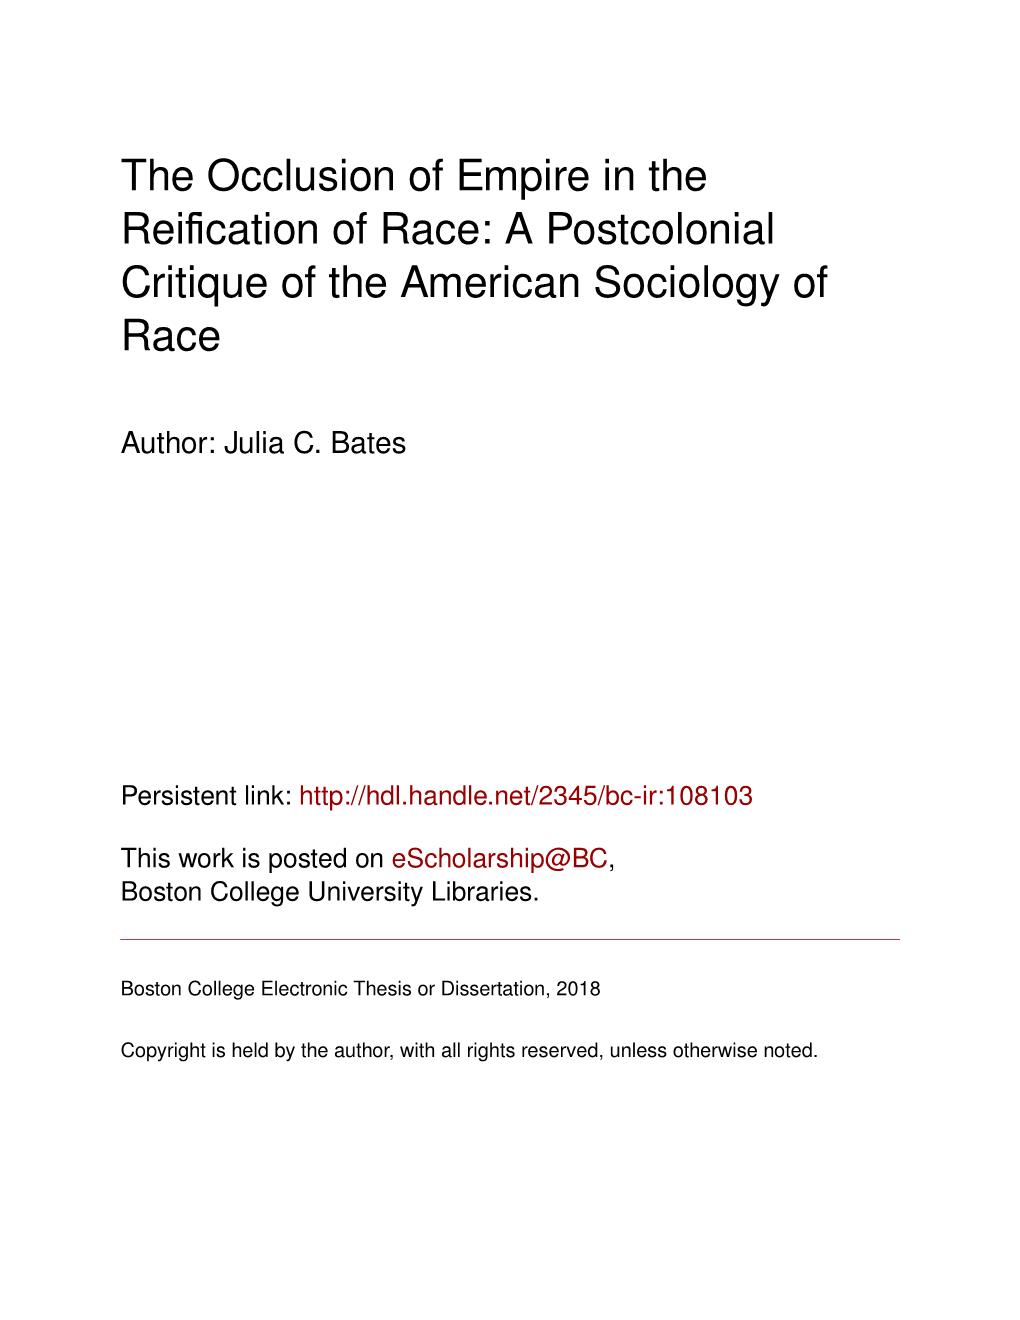 The Occlusion of Empire in the Reification of Race: a Postcolonial Critique of the American Sociology of Race